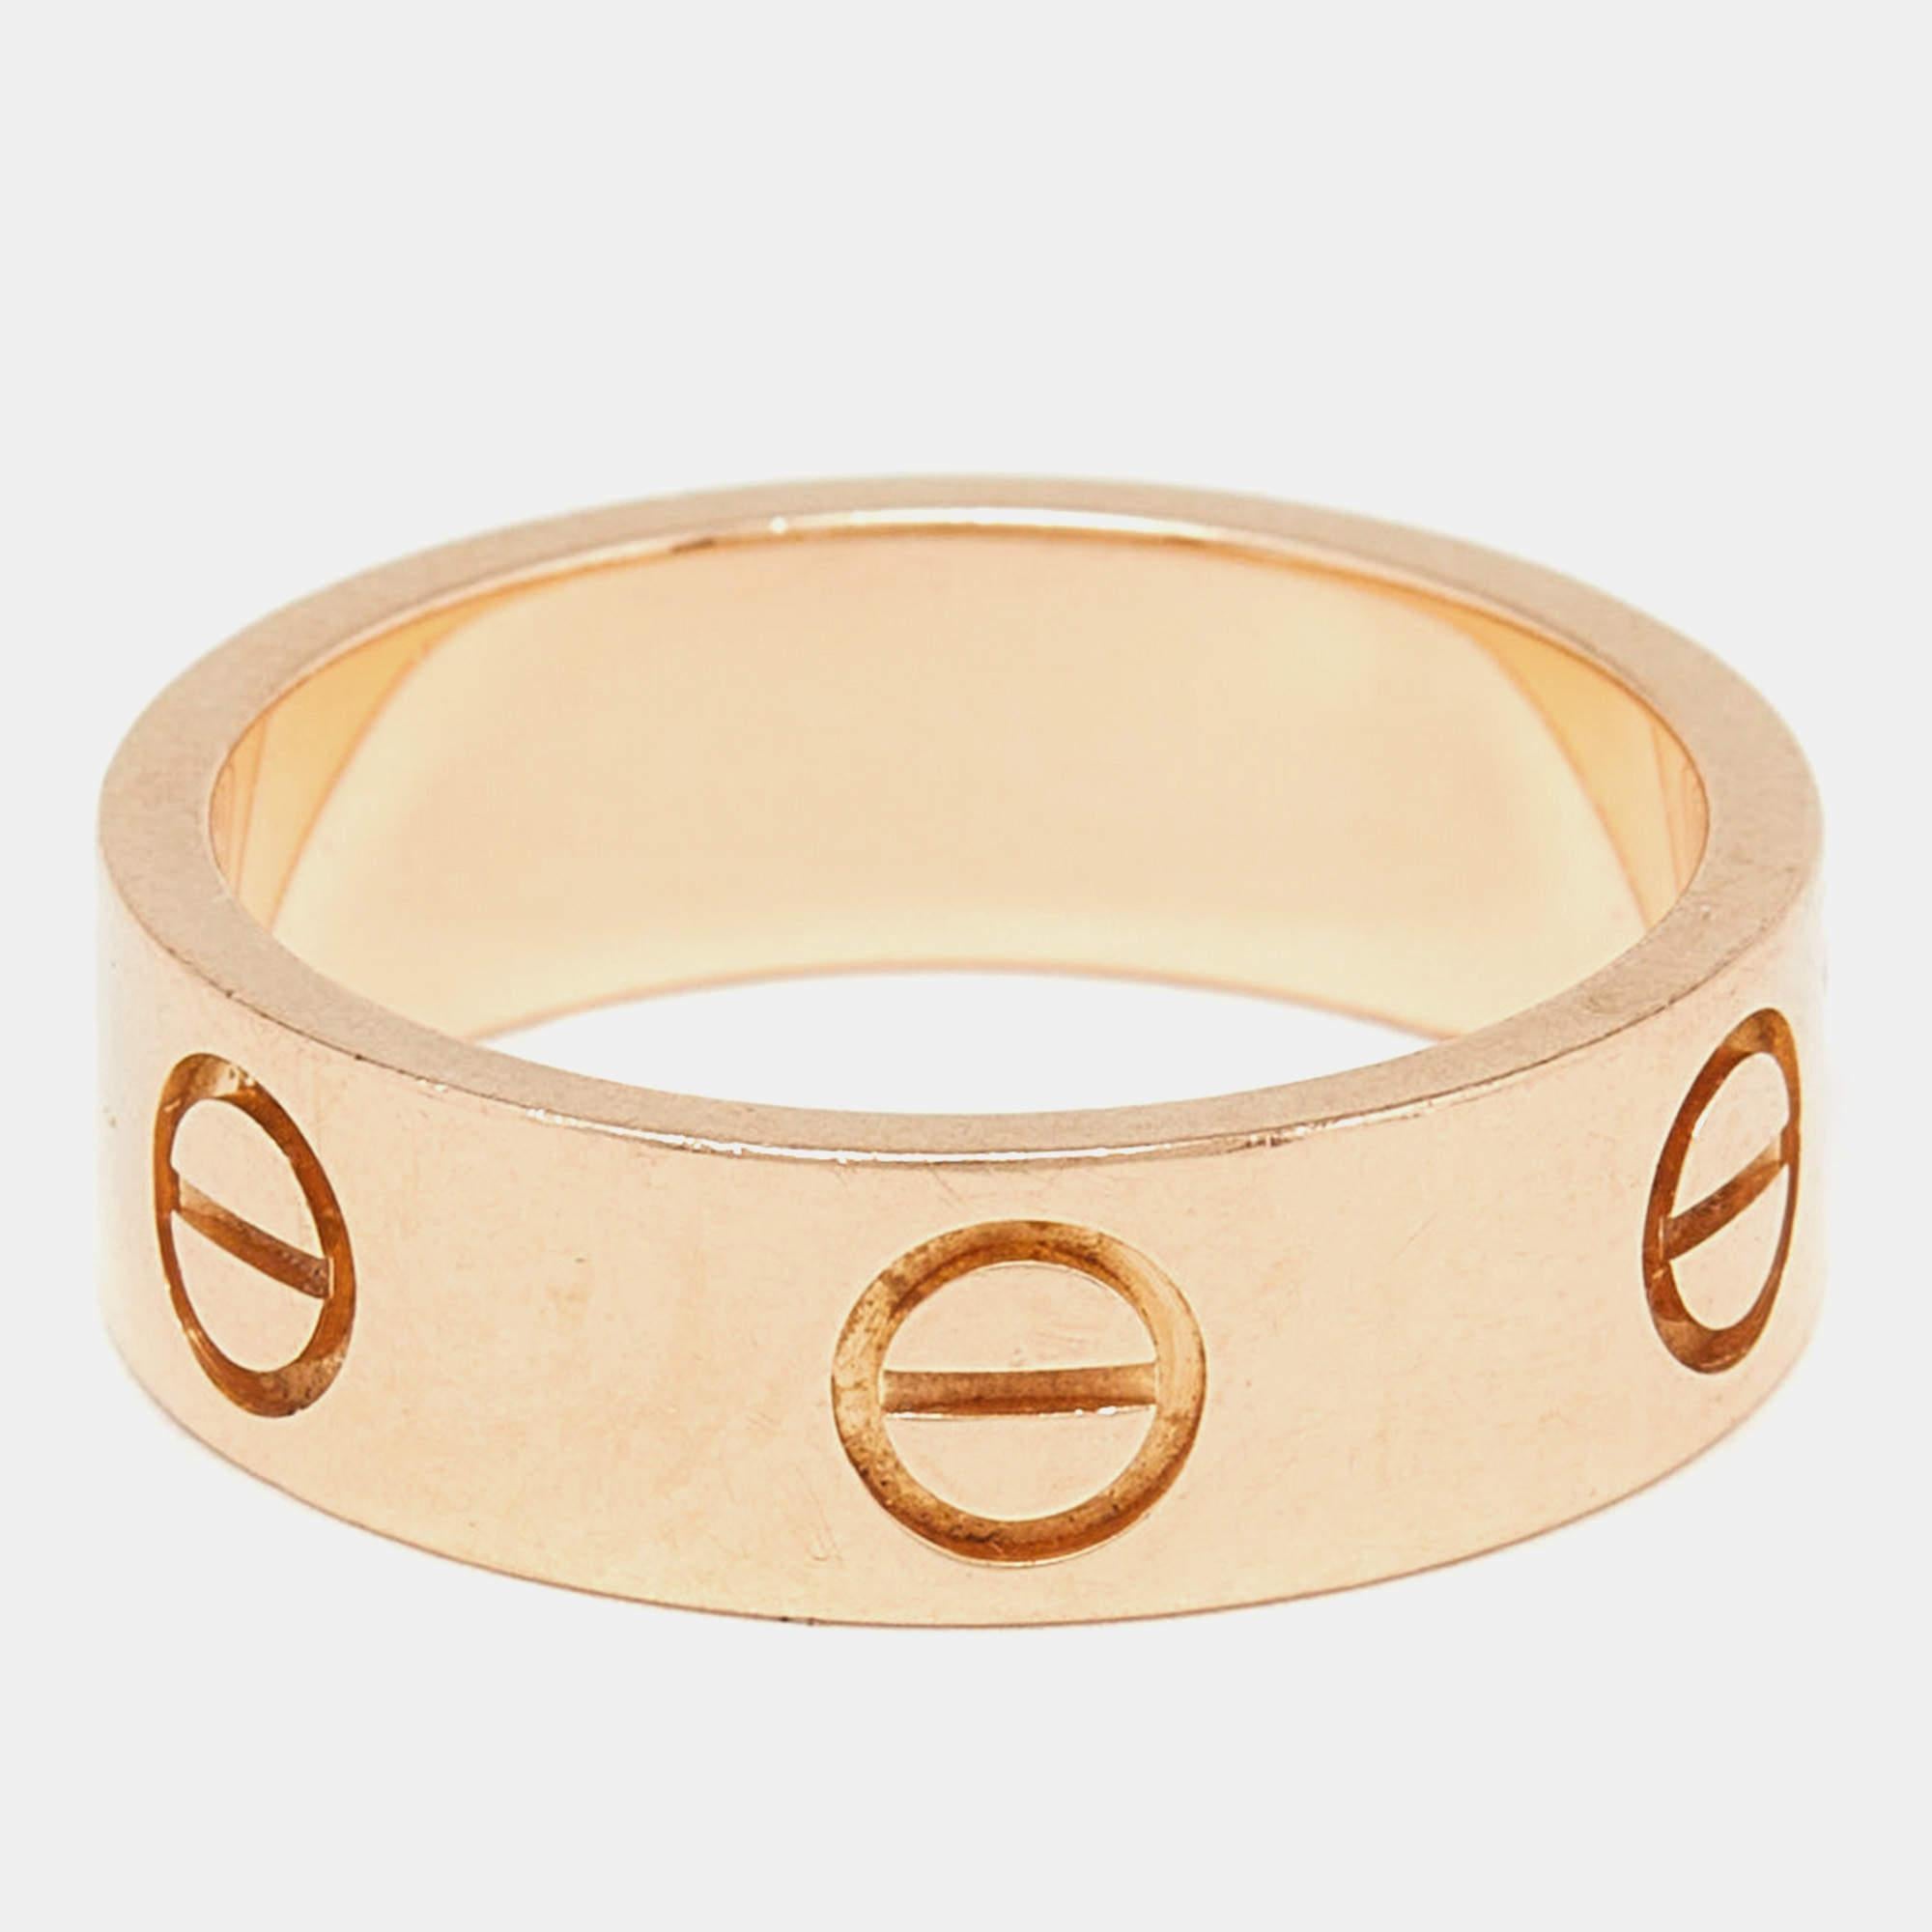 Experience the epitome of luxury and craftsmanship with this authentic Cartier Love ring in 18k yellow gold. Its timeless elegance and exceptional detailing make it a statement piece for any occasion.

Includes: Original Box

